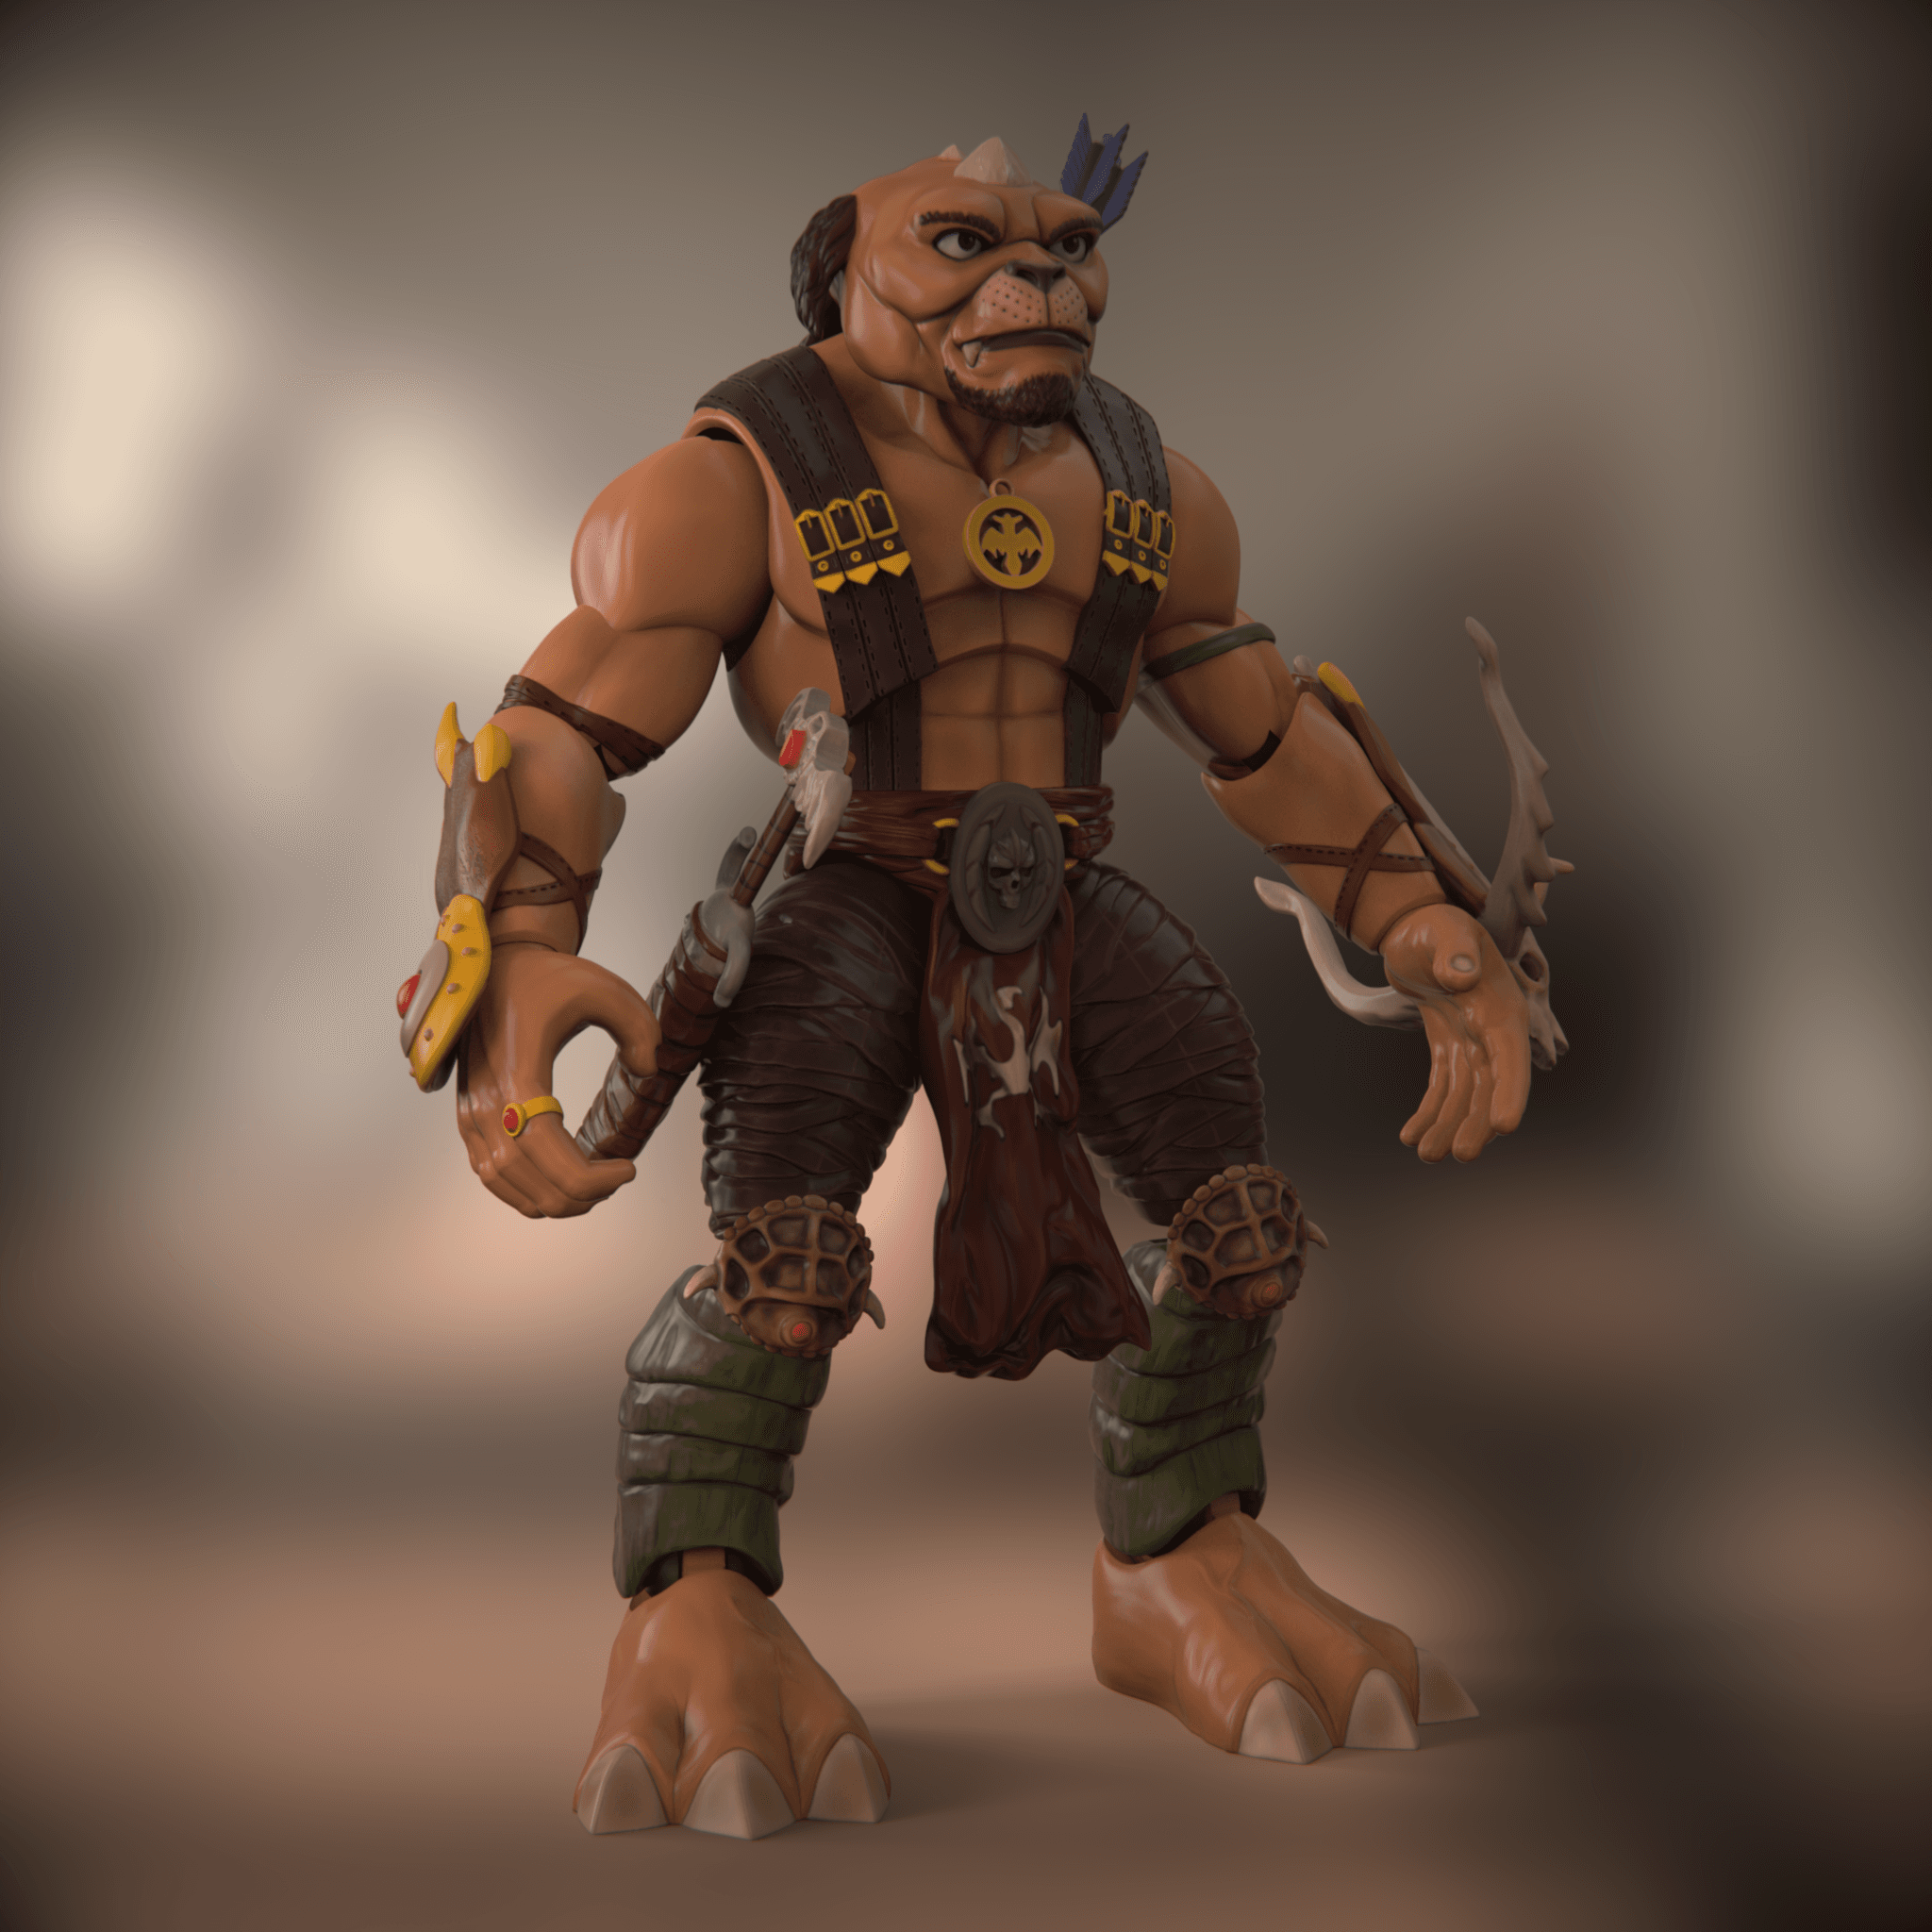 Small Soldiers Archer 3d model